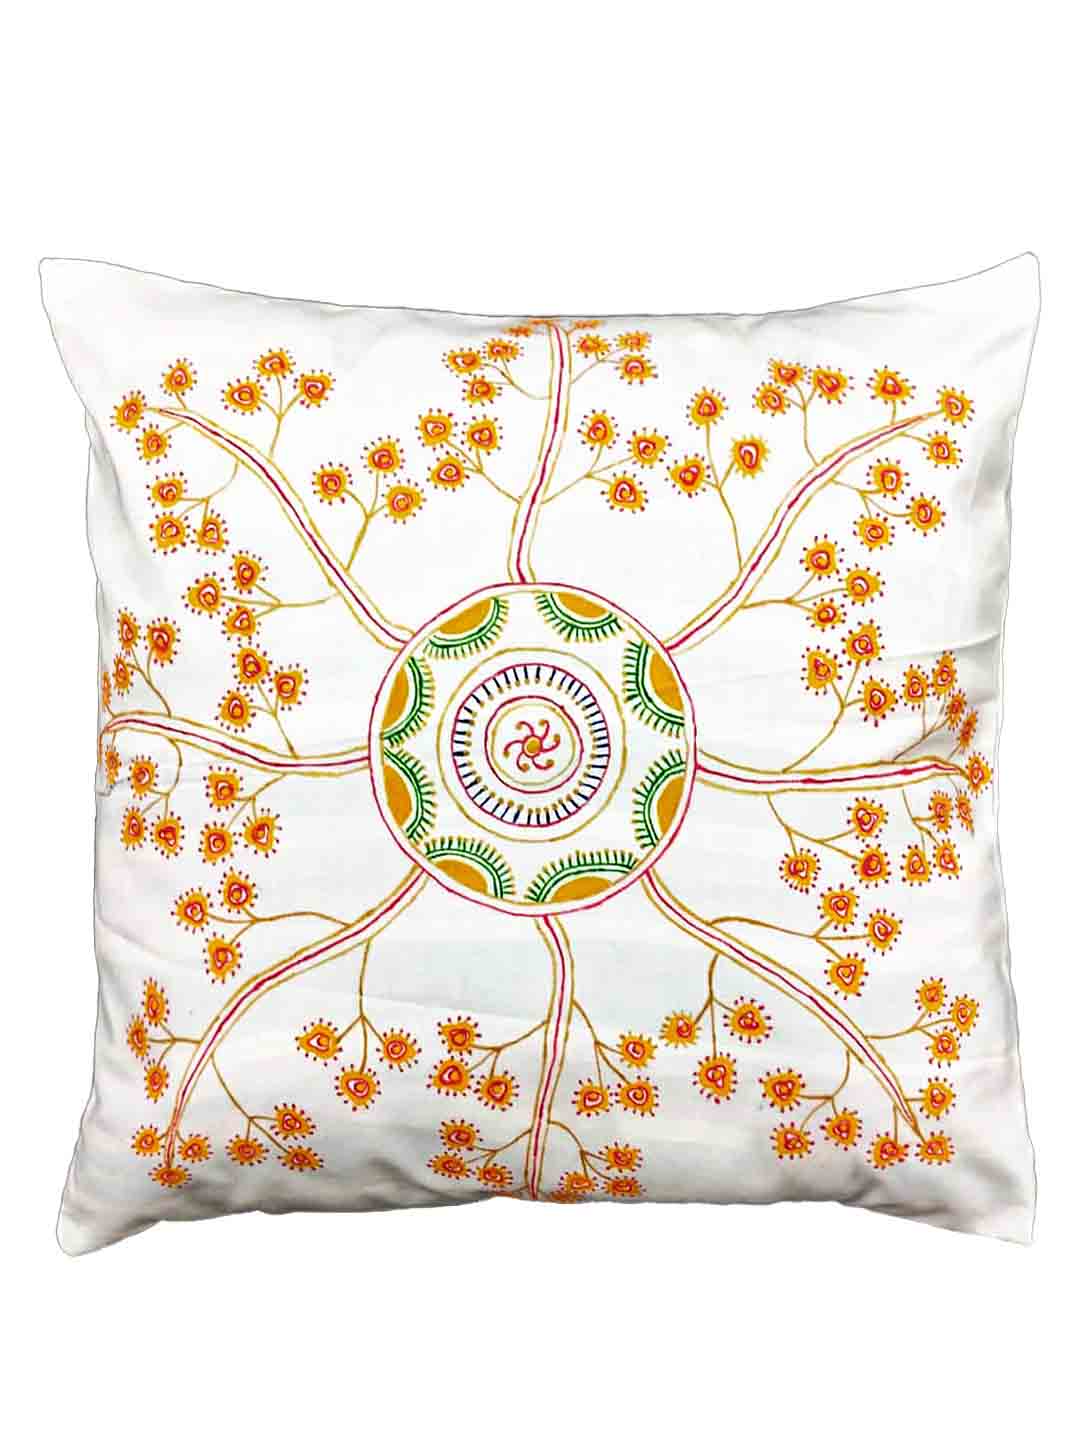 RYLABLUE Mehndi Flower Pattern for Henna Drawing and Tattoo in Ethnic Throw  Pillowcase Cushion Case Cover - Walmart.ca